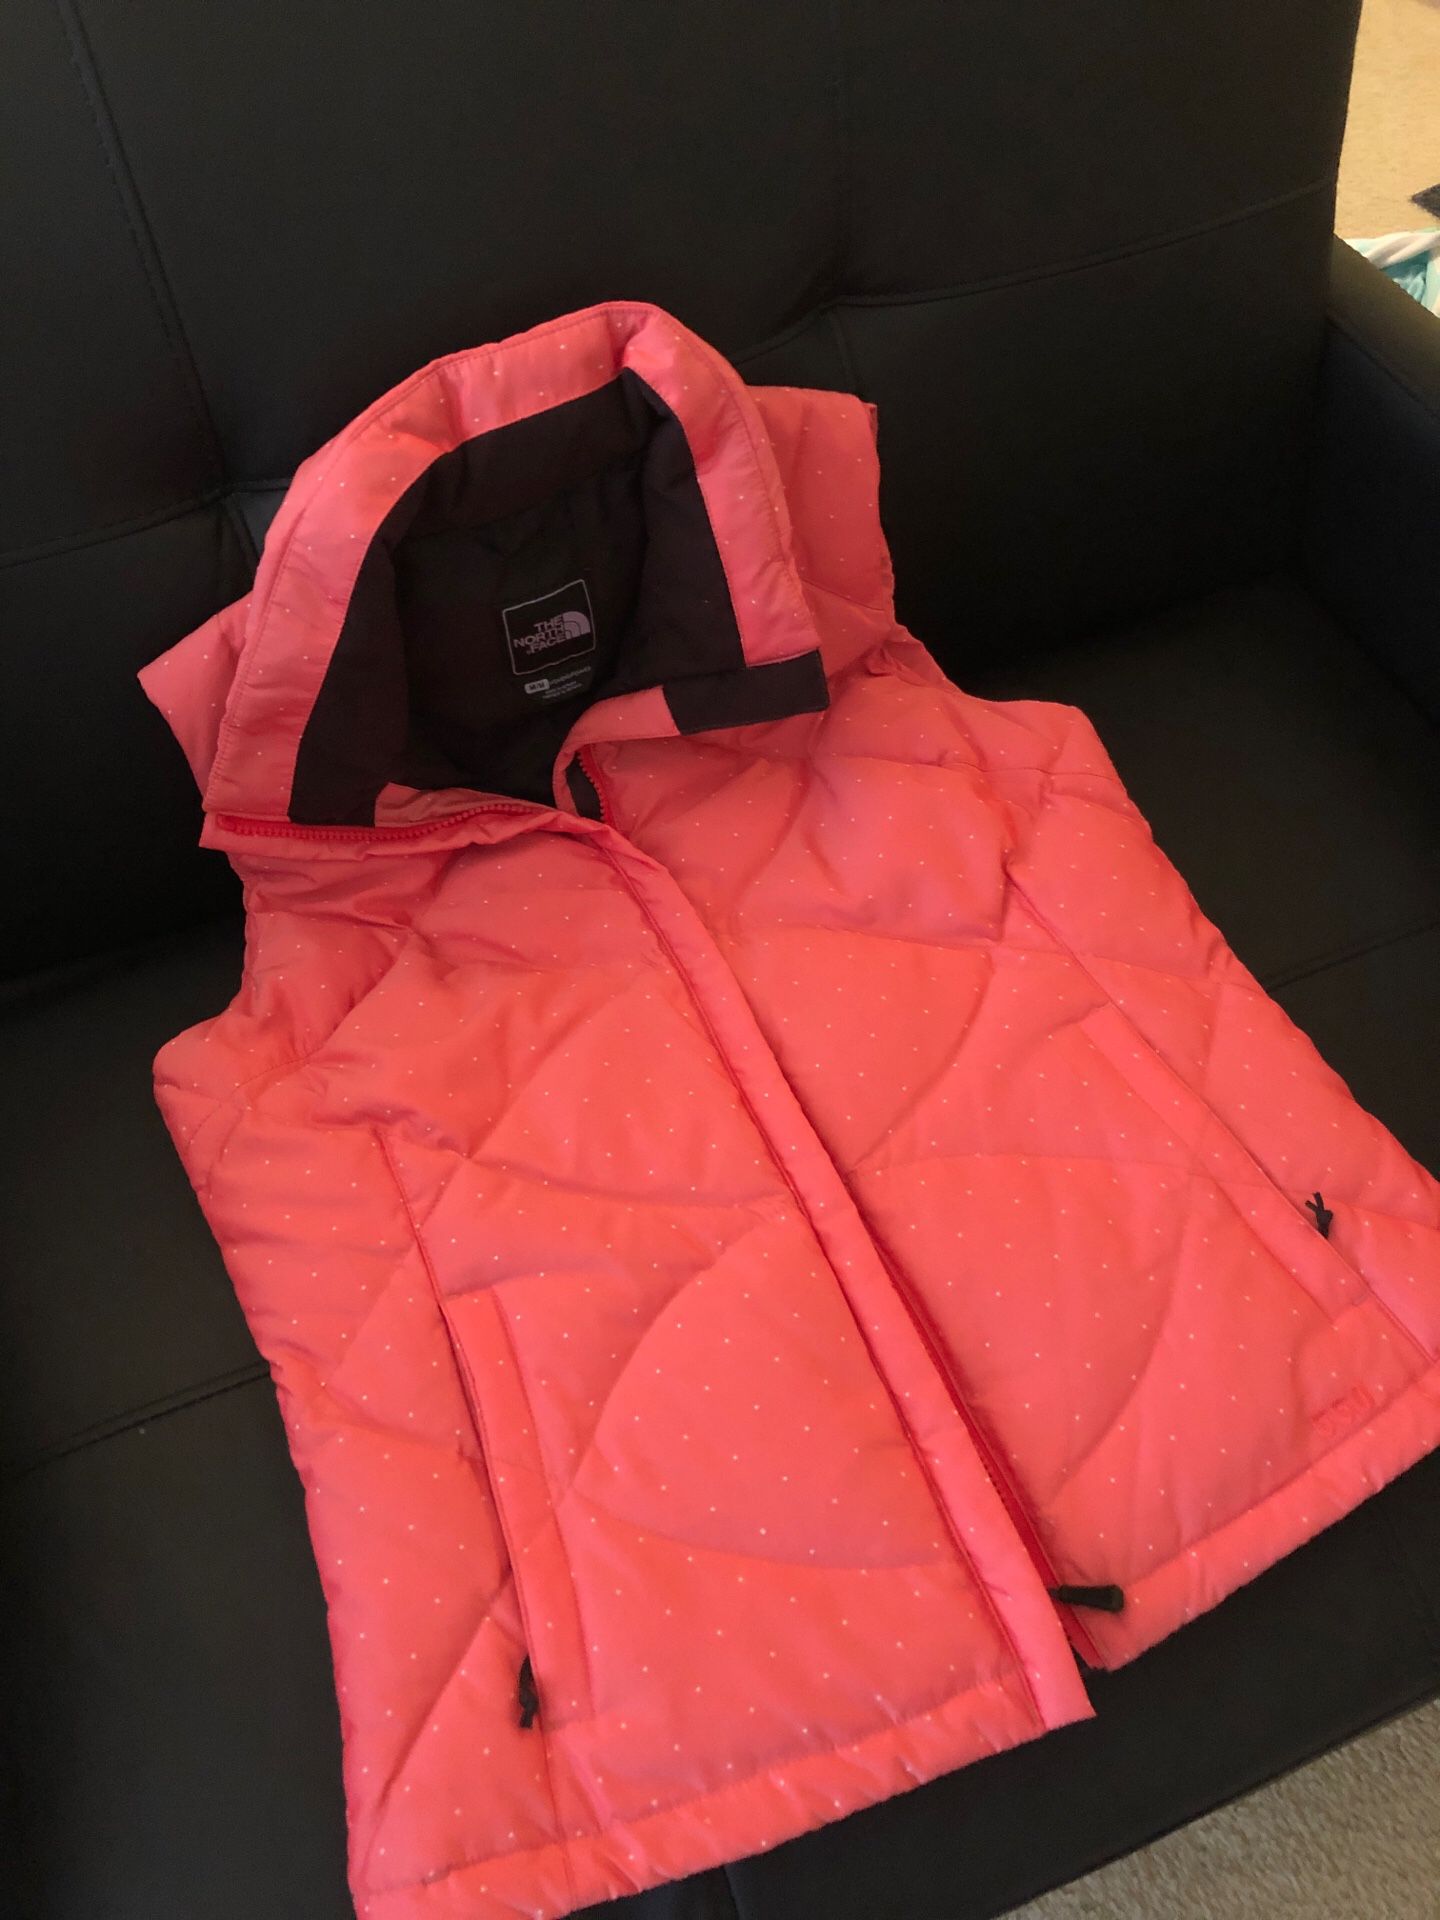 North Face Down Vest! Worn once! Size M. Pink with white polka dots!